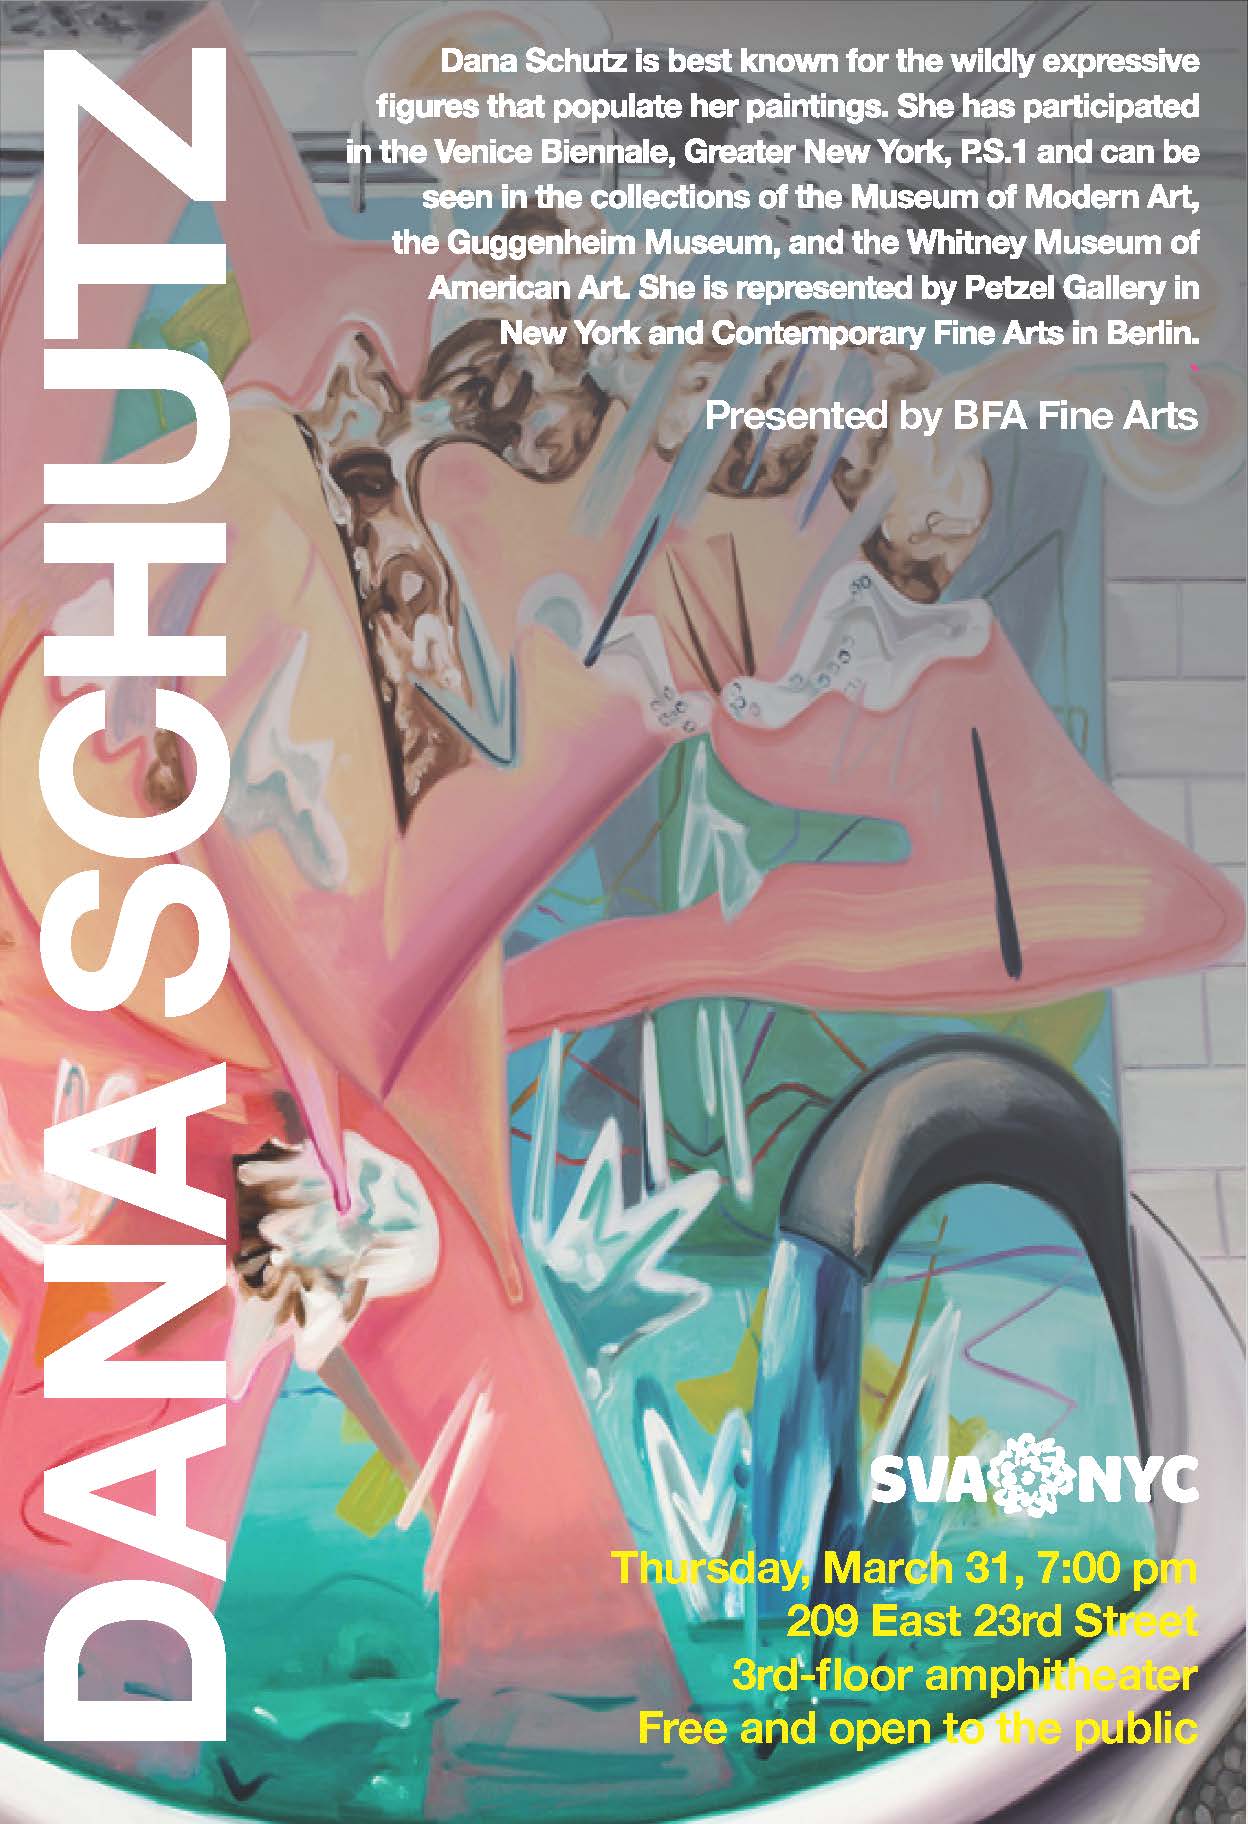 Event poster for Dana Schutz, held on Thursday, March 31, 7:00pm, at 203 East 23rd Street, 3rd-floor amphitheater. the poster represents a caricature person taking a shower